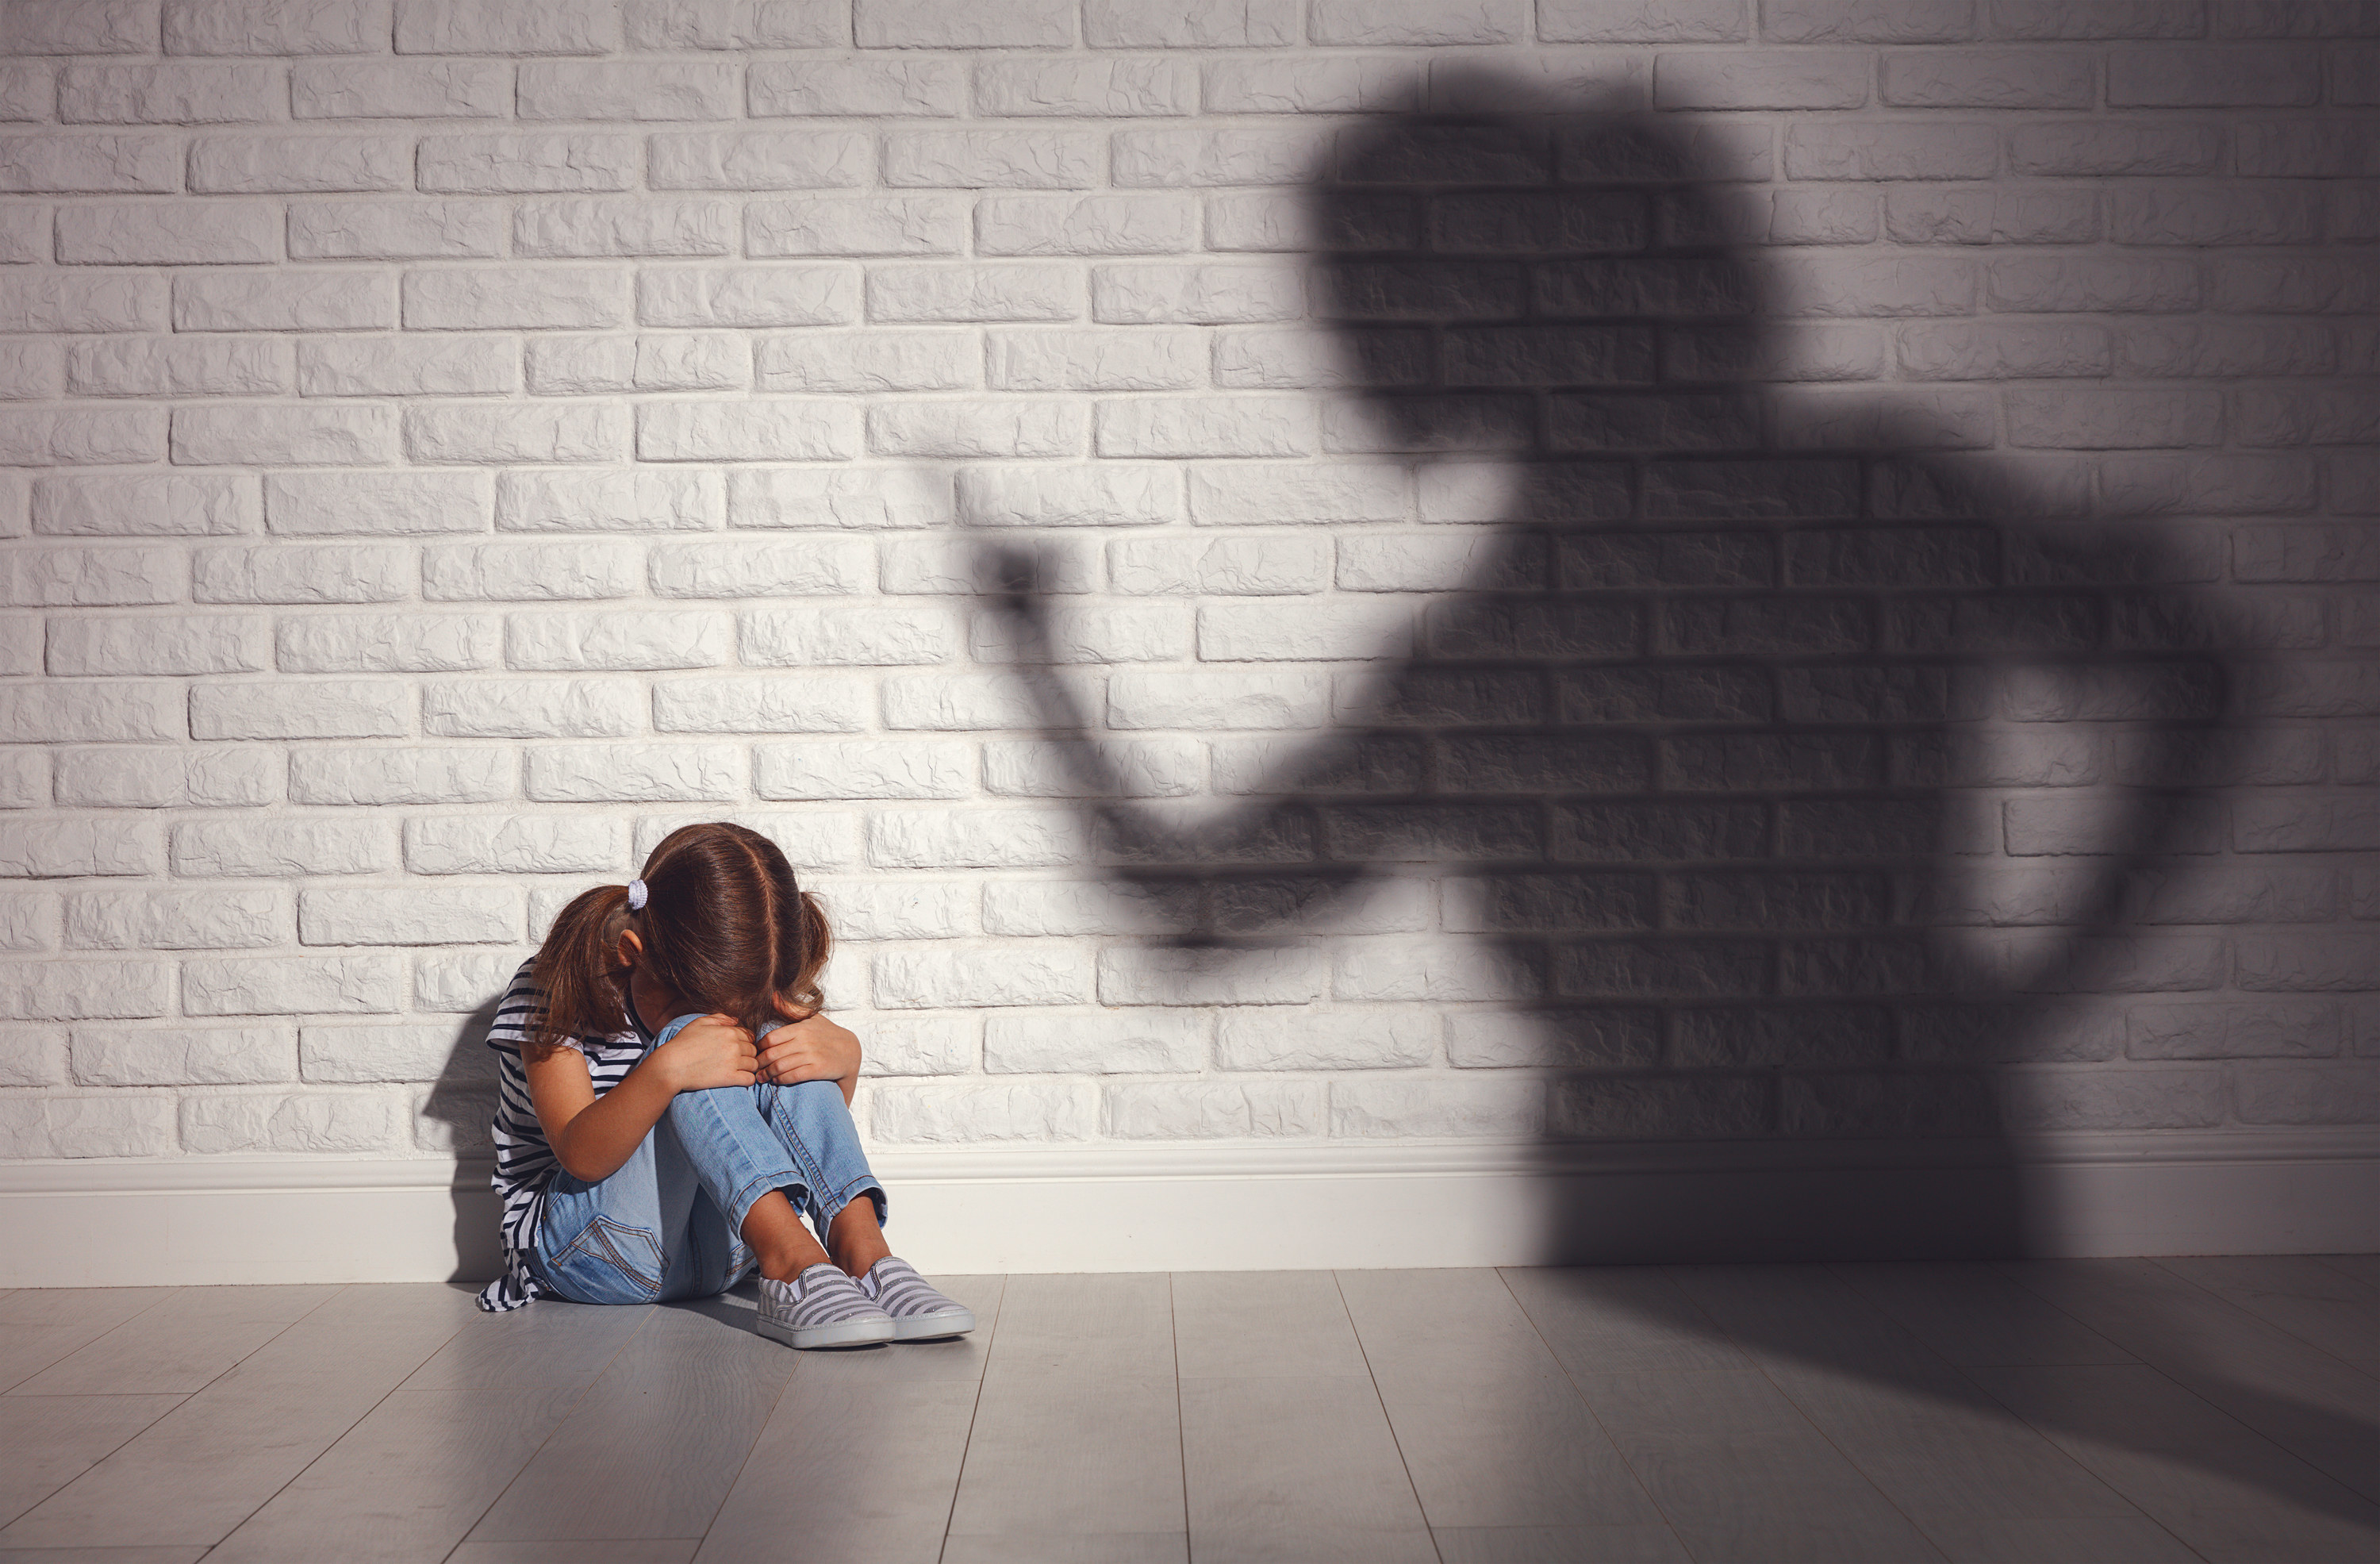 Little girl with her face in her knees in sadness with a shadow of her mother scolding her